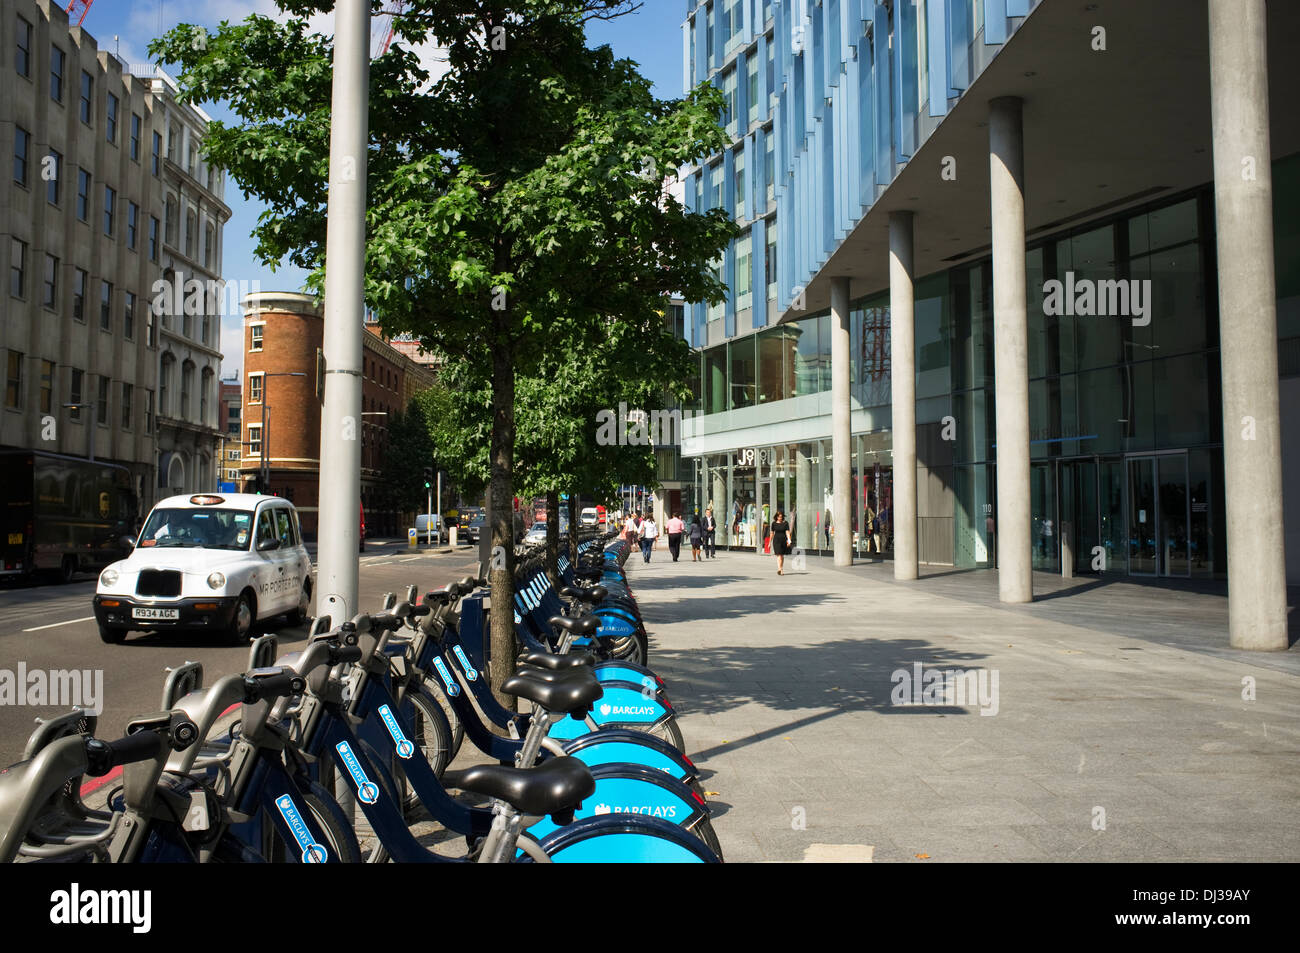 A row of Boris bikes, Barclay's Cycle Hire public bicycle sharing scheme  outside the Blue Fin Building, Bankside, London, UK. Stock Photo